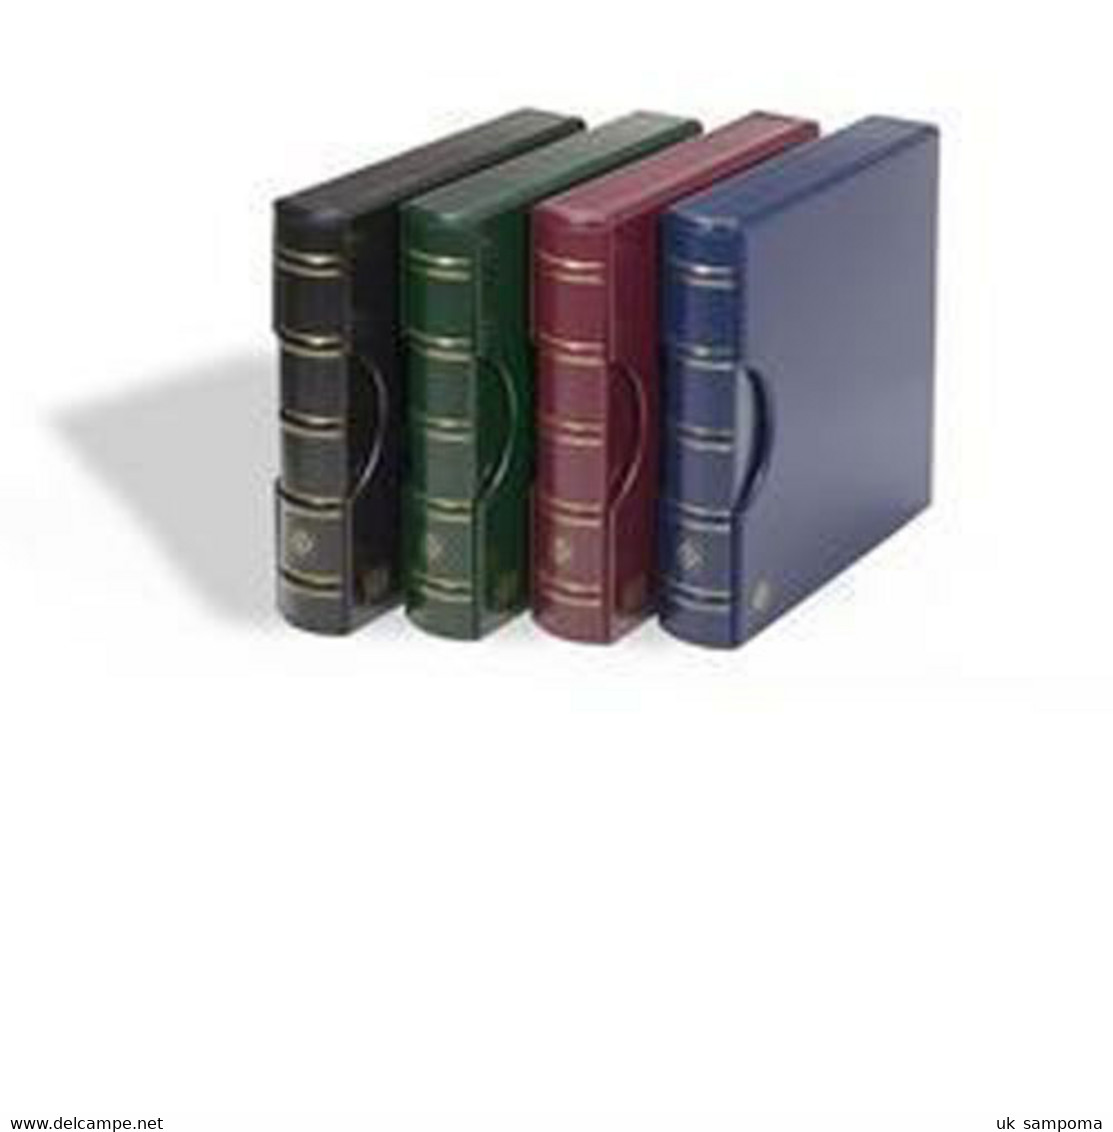 LIGHTHOUSE Ring Binder EXCELLNT DE, In Classic Design With Slipcase, Black - Large Format, Black Pages